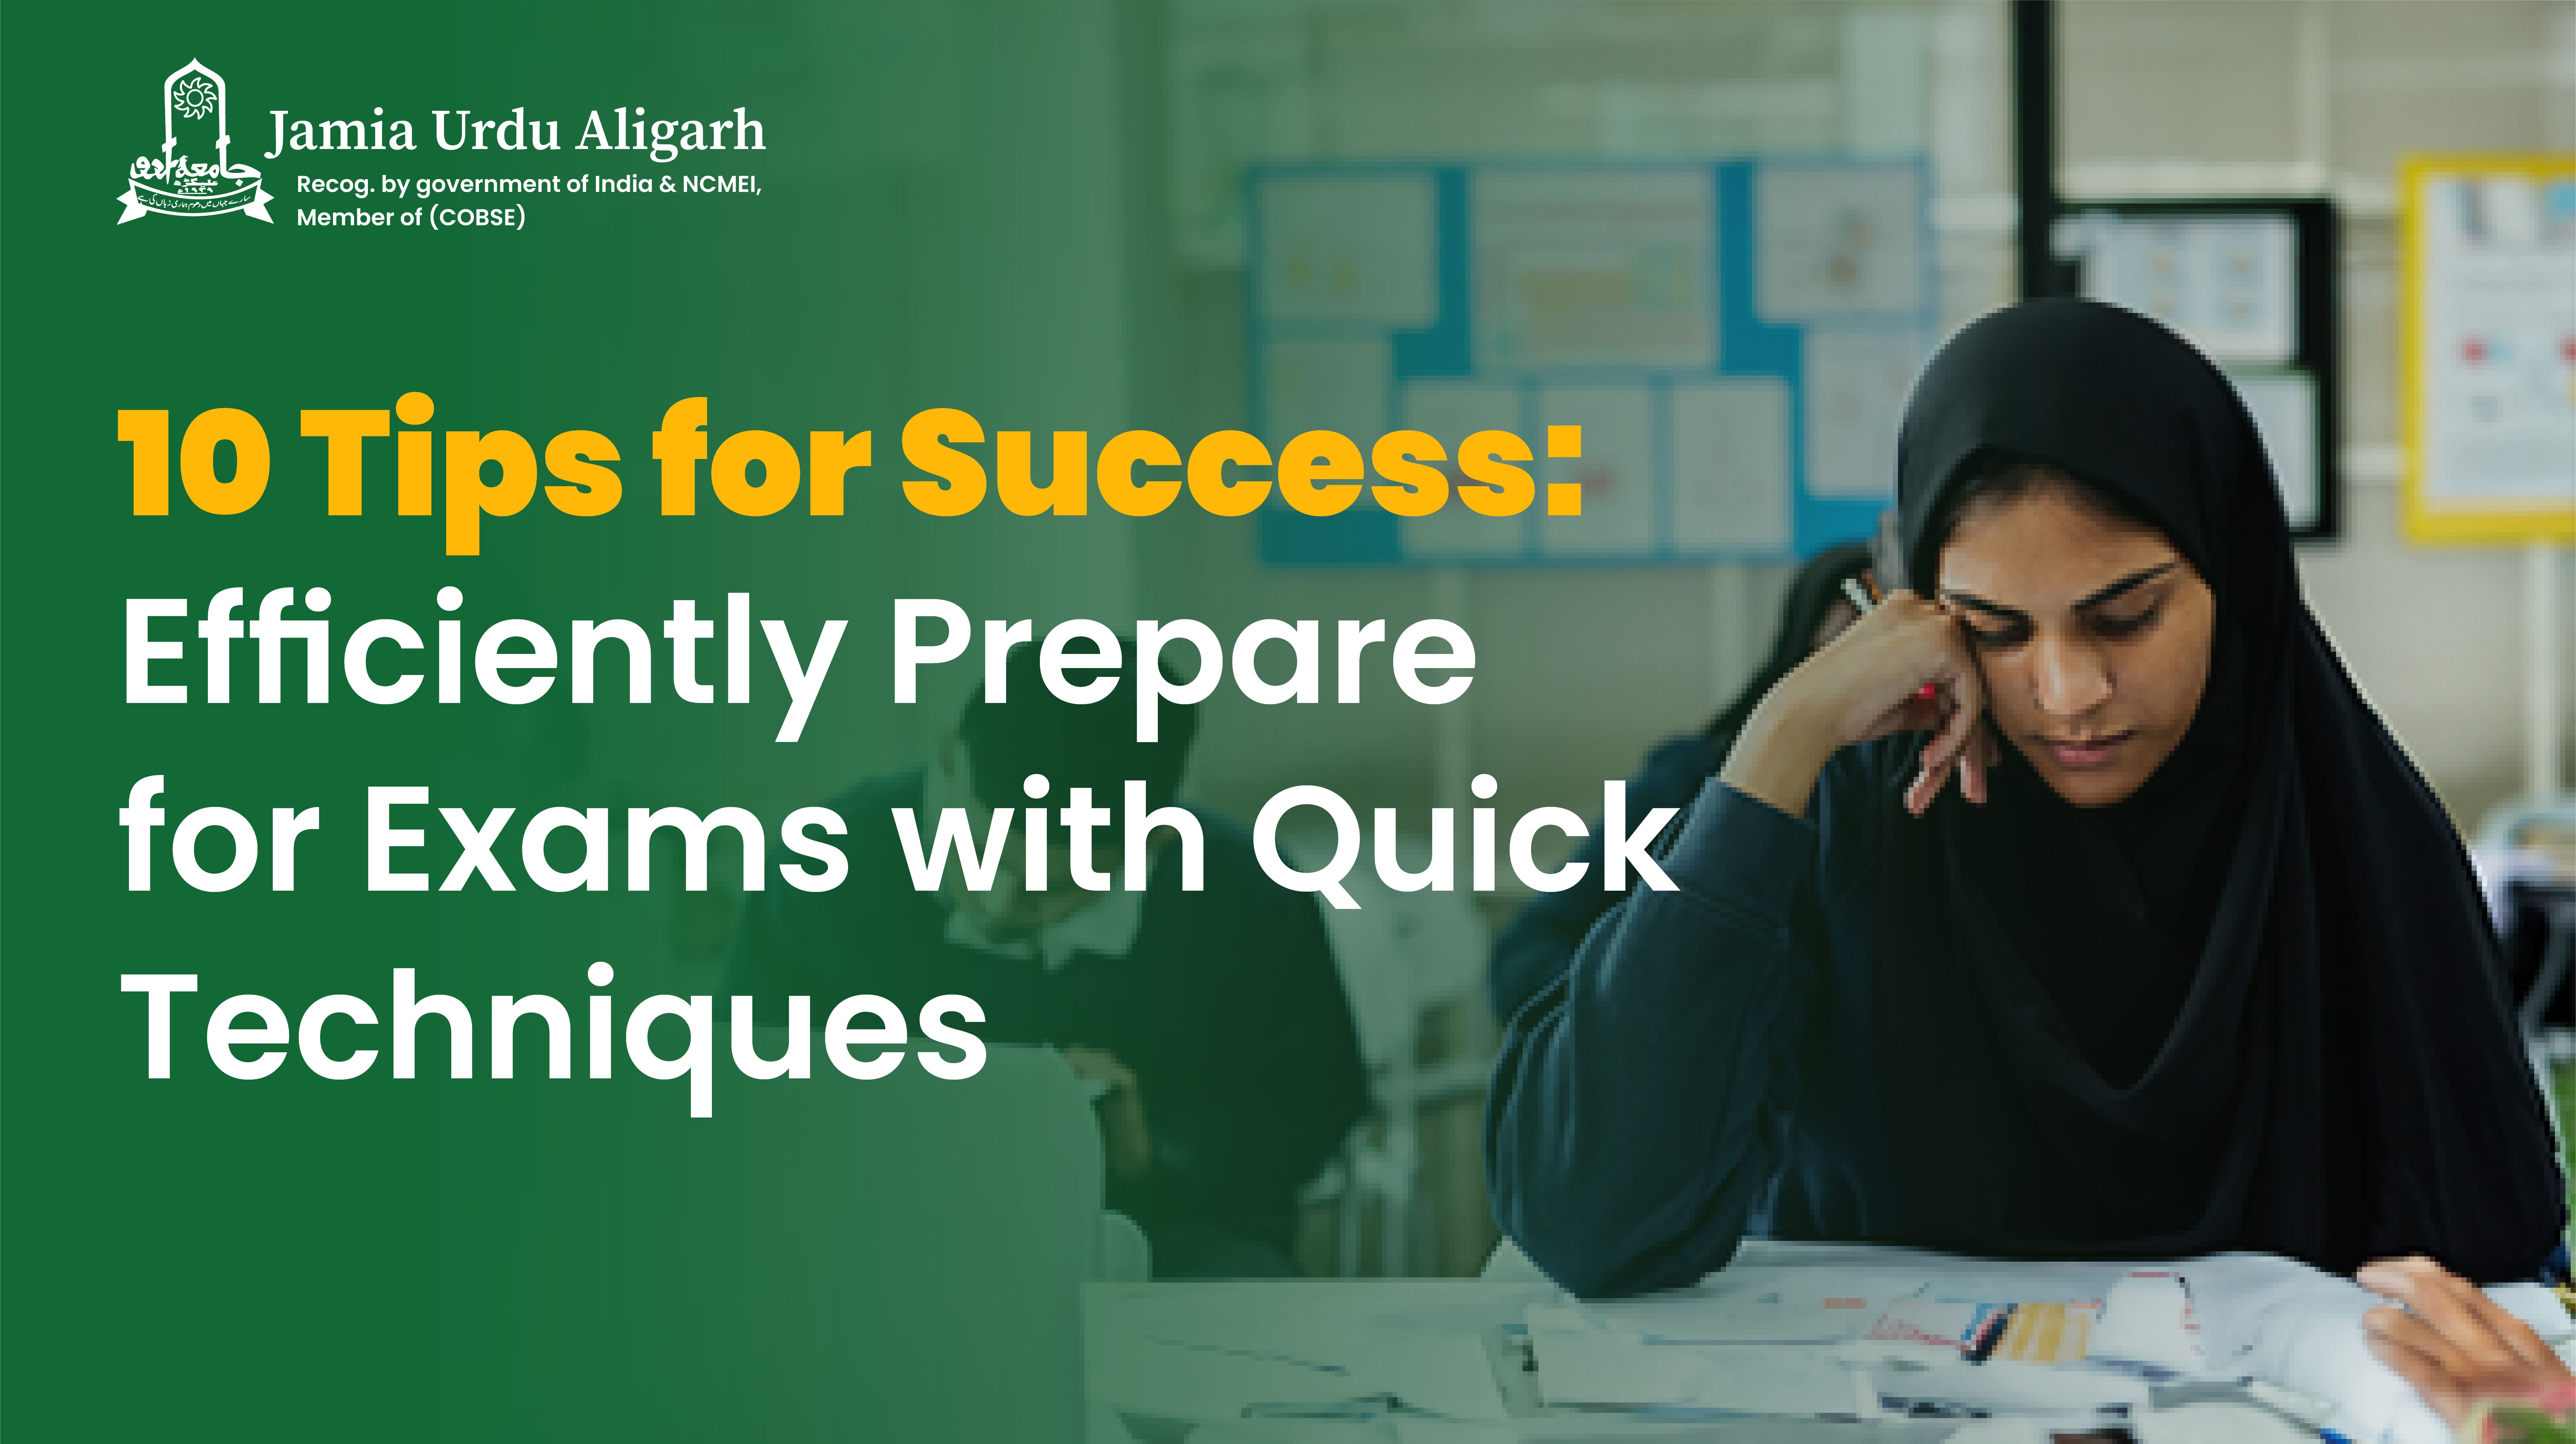 10 Tips for Success: Efficiently Prepare for Exams with Quick Techniques